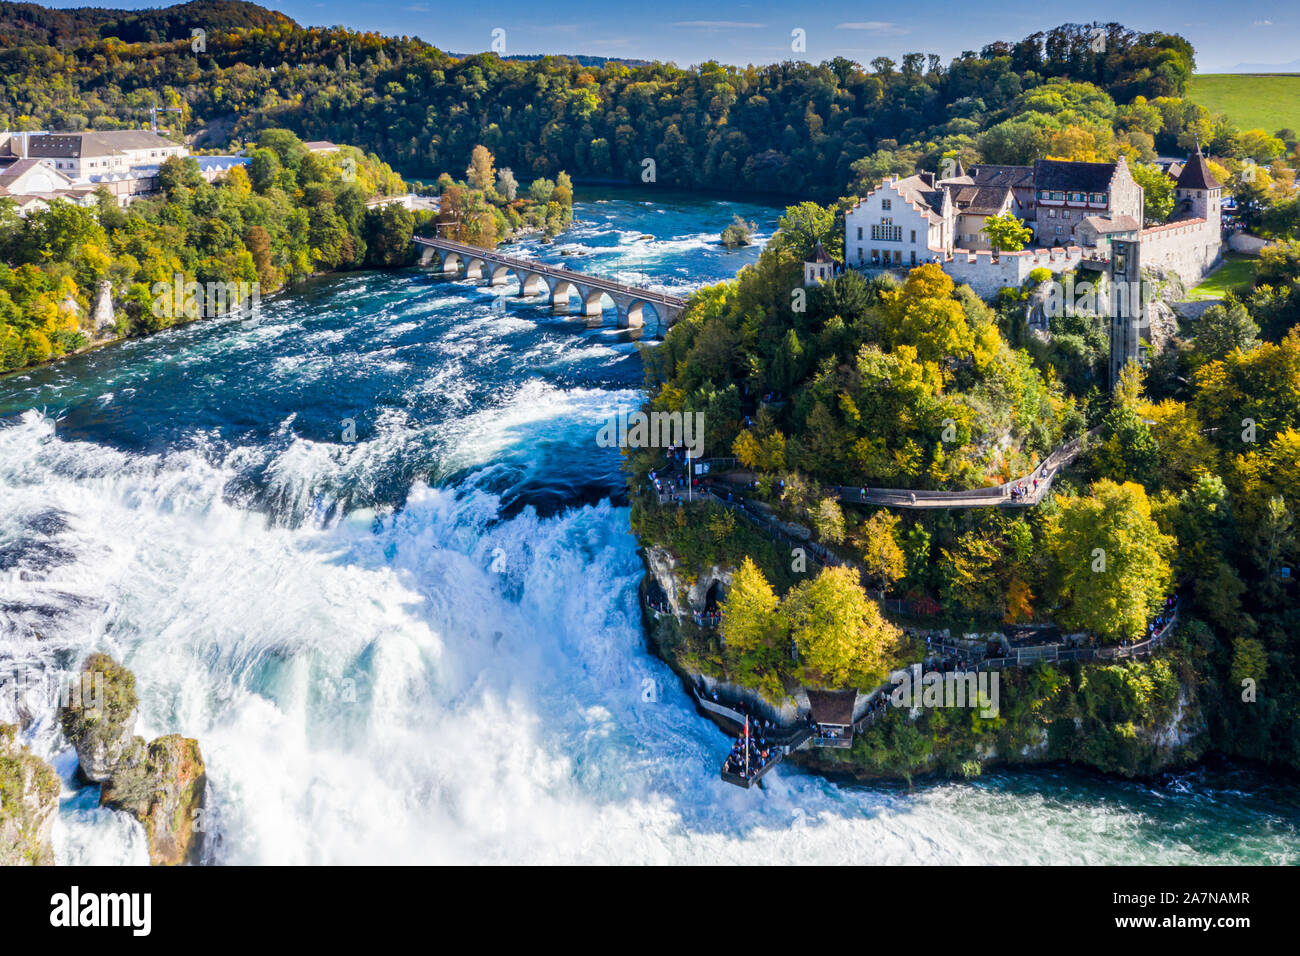 Rhine Falls or Rheinfall, Switzerland panoramic aerial view. Tourist boat in waterfall. Bridge and border between the cantons Schaffhausen and Zurich. Stock Photo